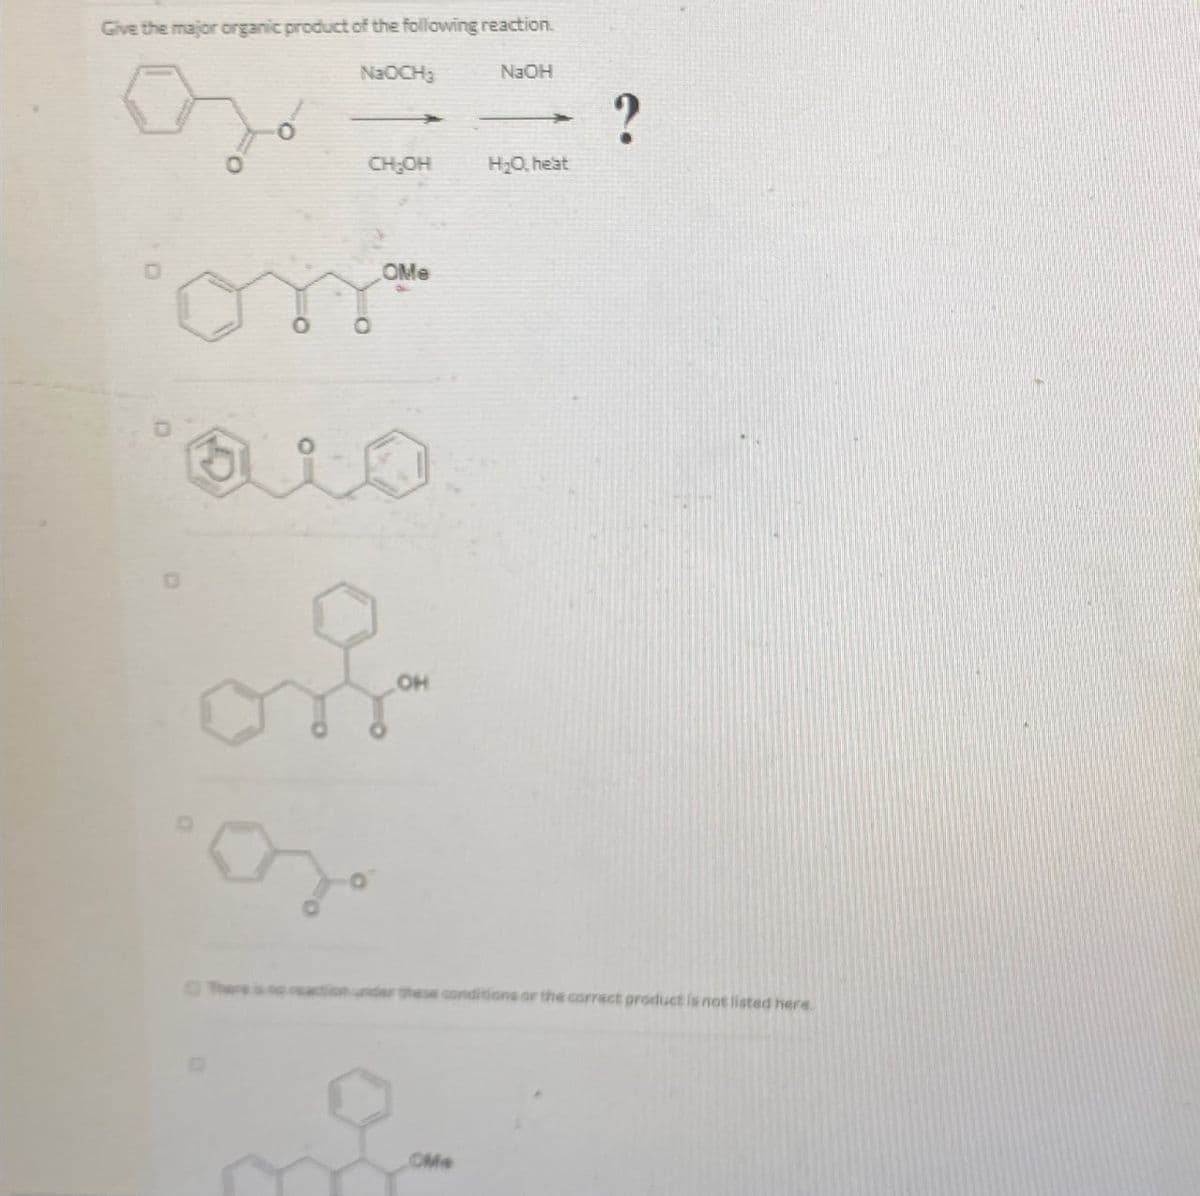 Give the major organic product of the following reaction.
NaOCH
NaOH
0
?
CH₂OH
H₂O heat
கு
OMe
OH
these conditions or the correct product is not listed here.
OMe